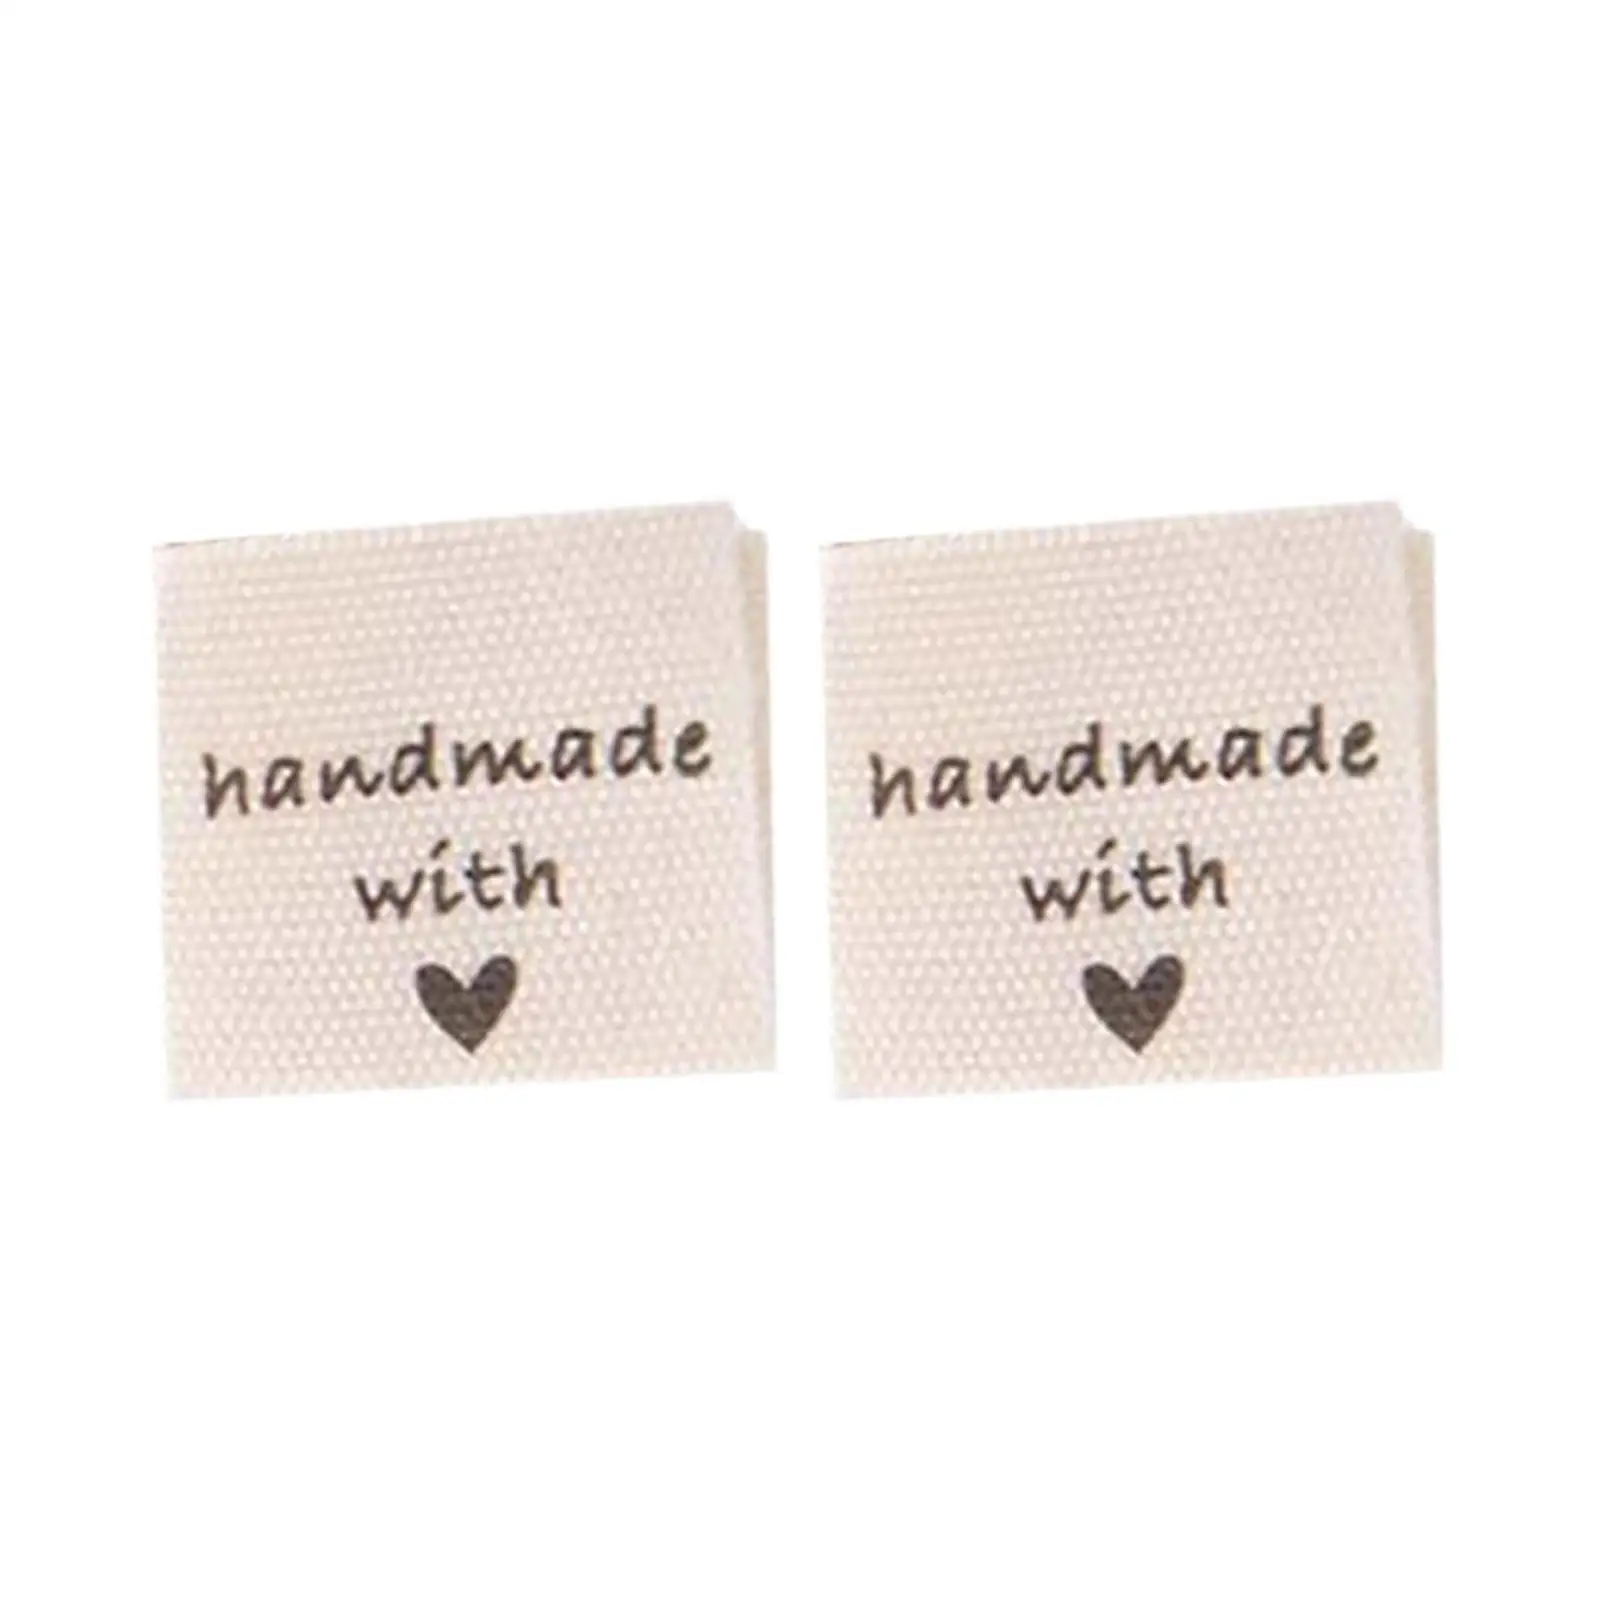 100 Clothing Labels Handmade Labels Washable Cloth Garment Decoration Sewing Labels for Sweaters Hats craft Purses Garment